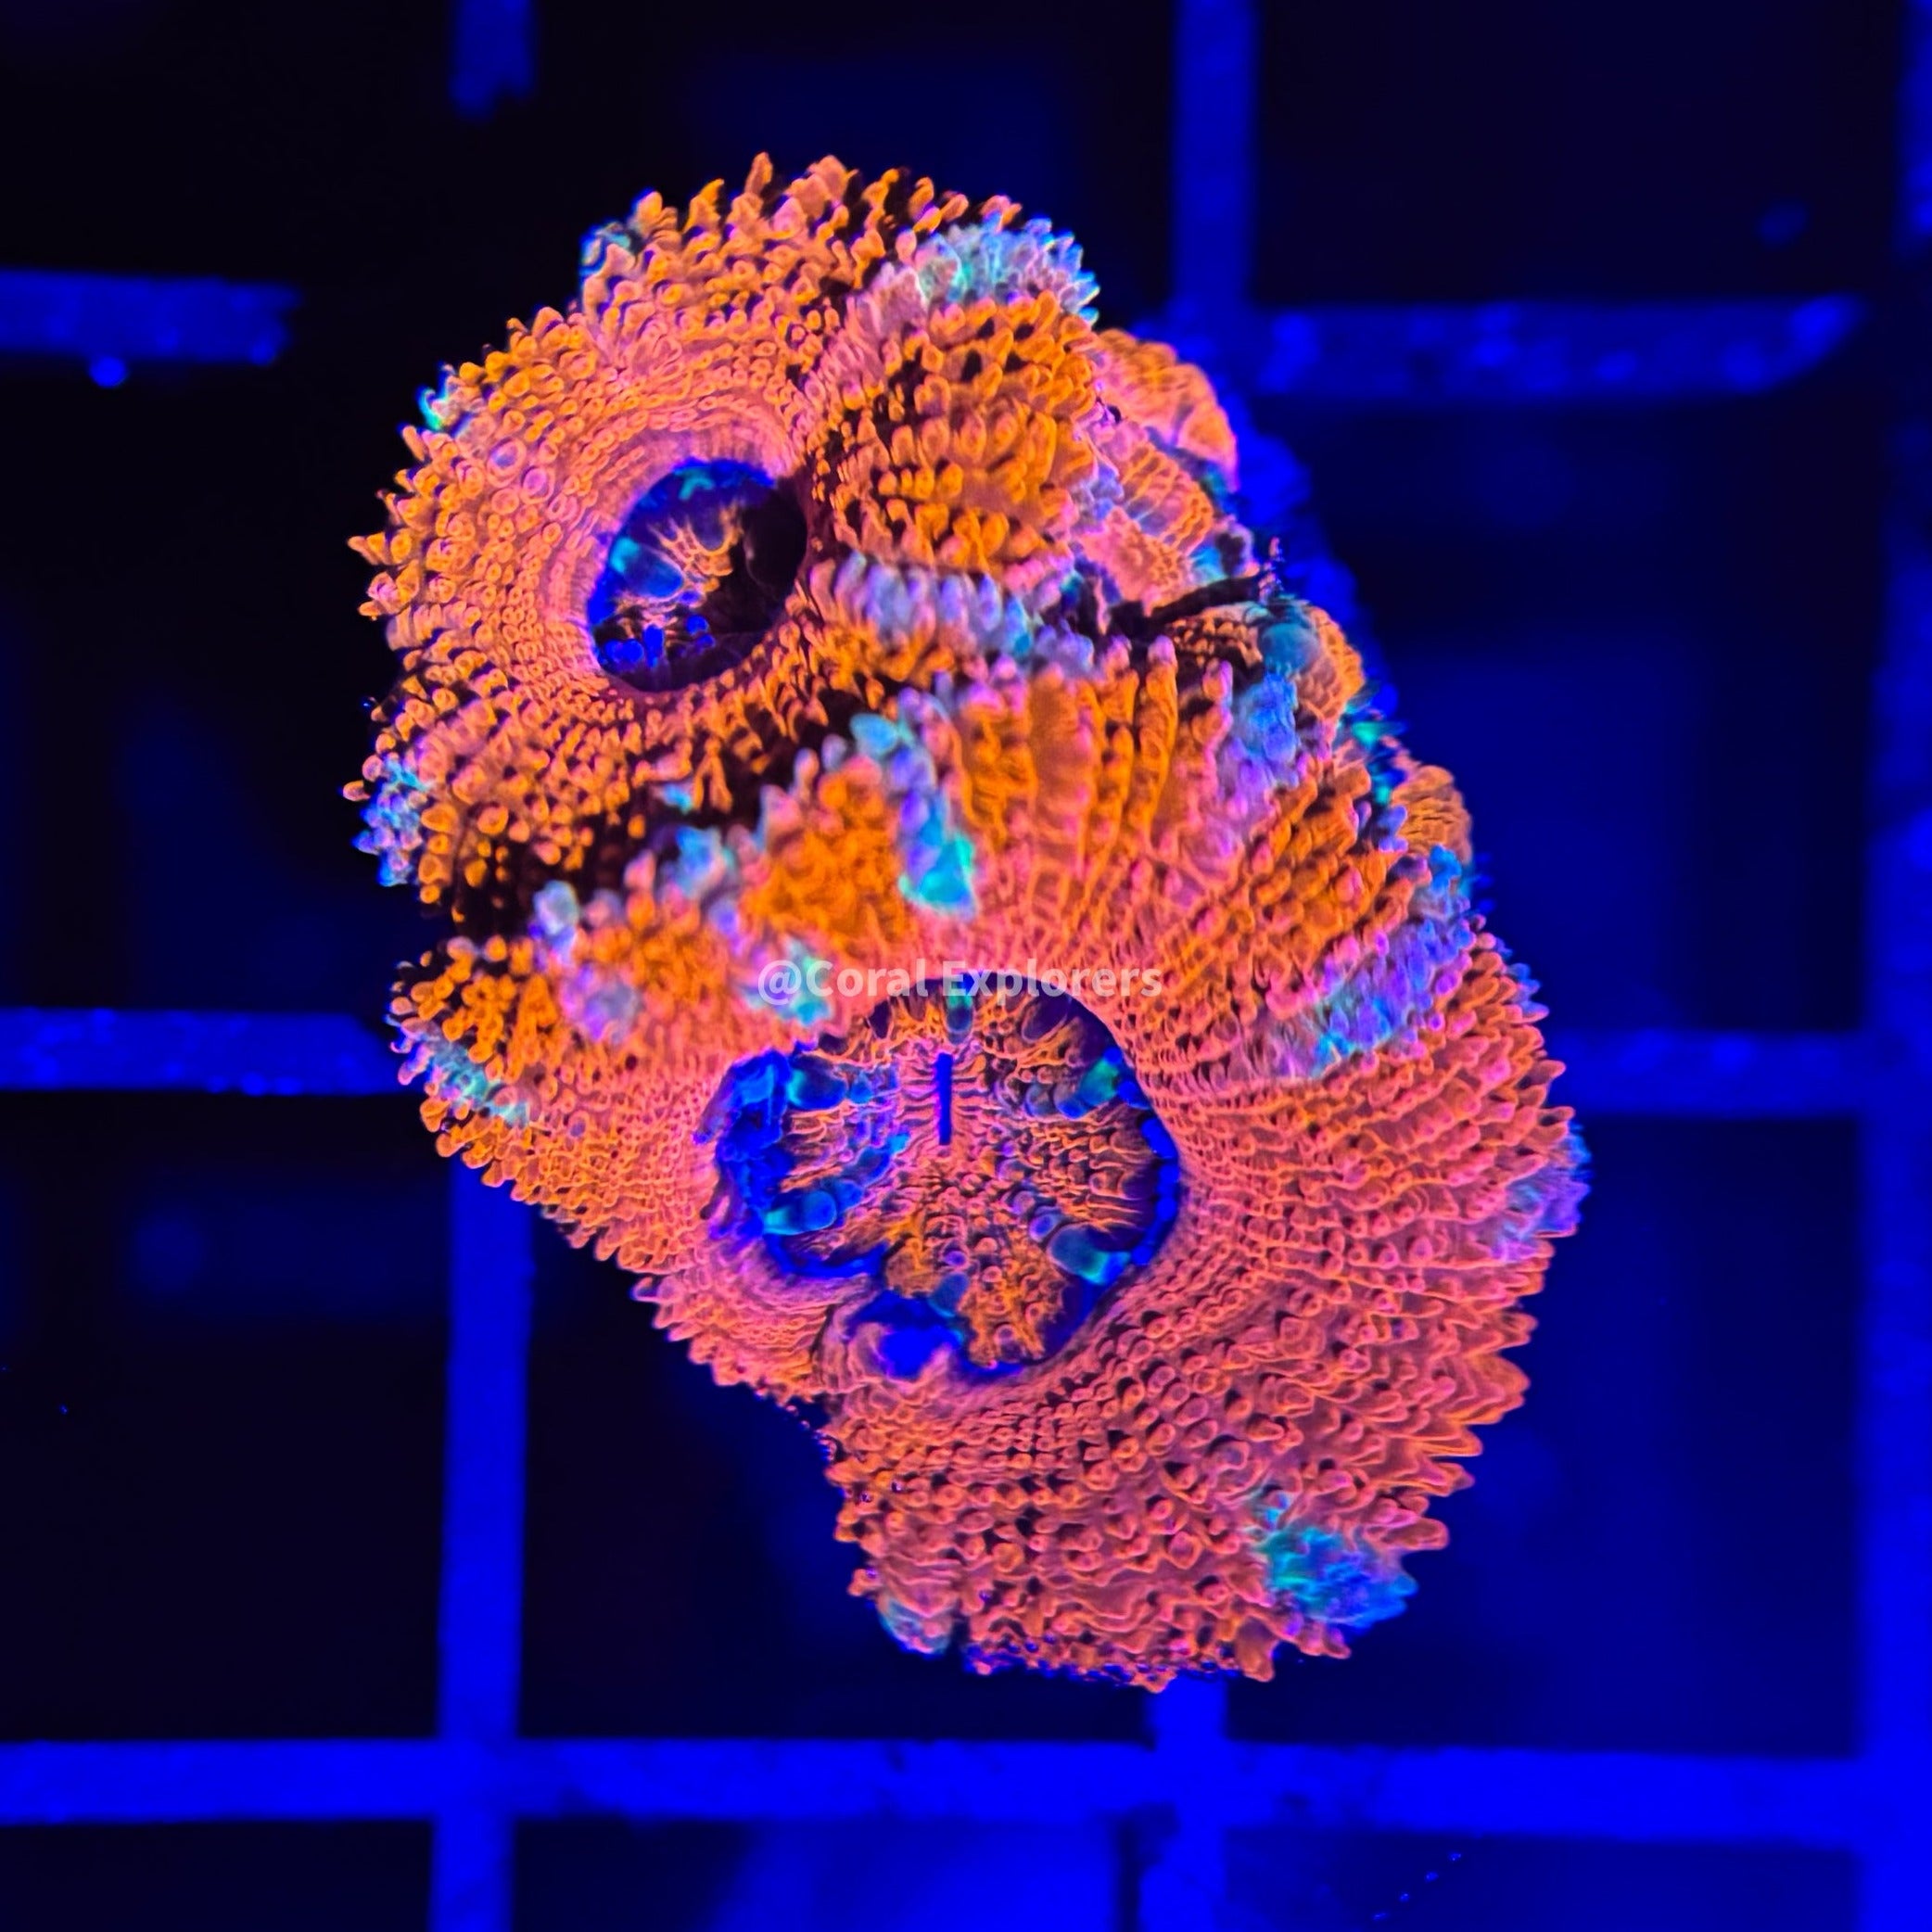 CE- WYSIWYG Lady Luck Rainbow Acan Lord Micromussa Coral Frag LPS SPS #R1OC12